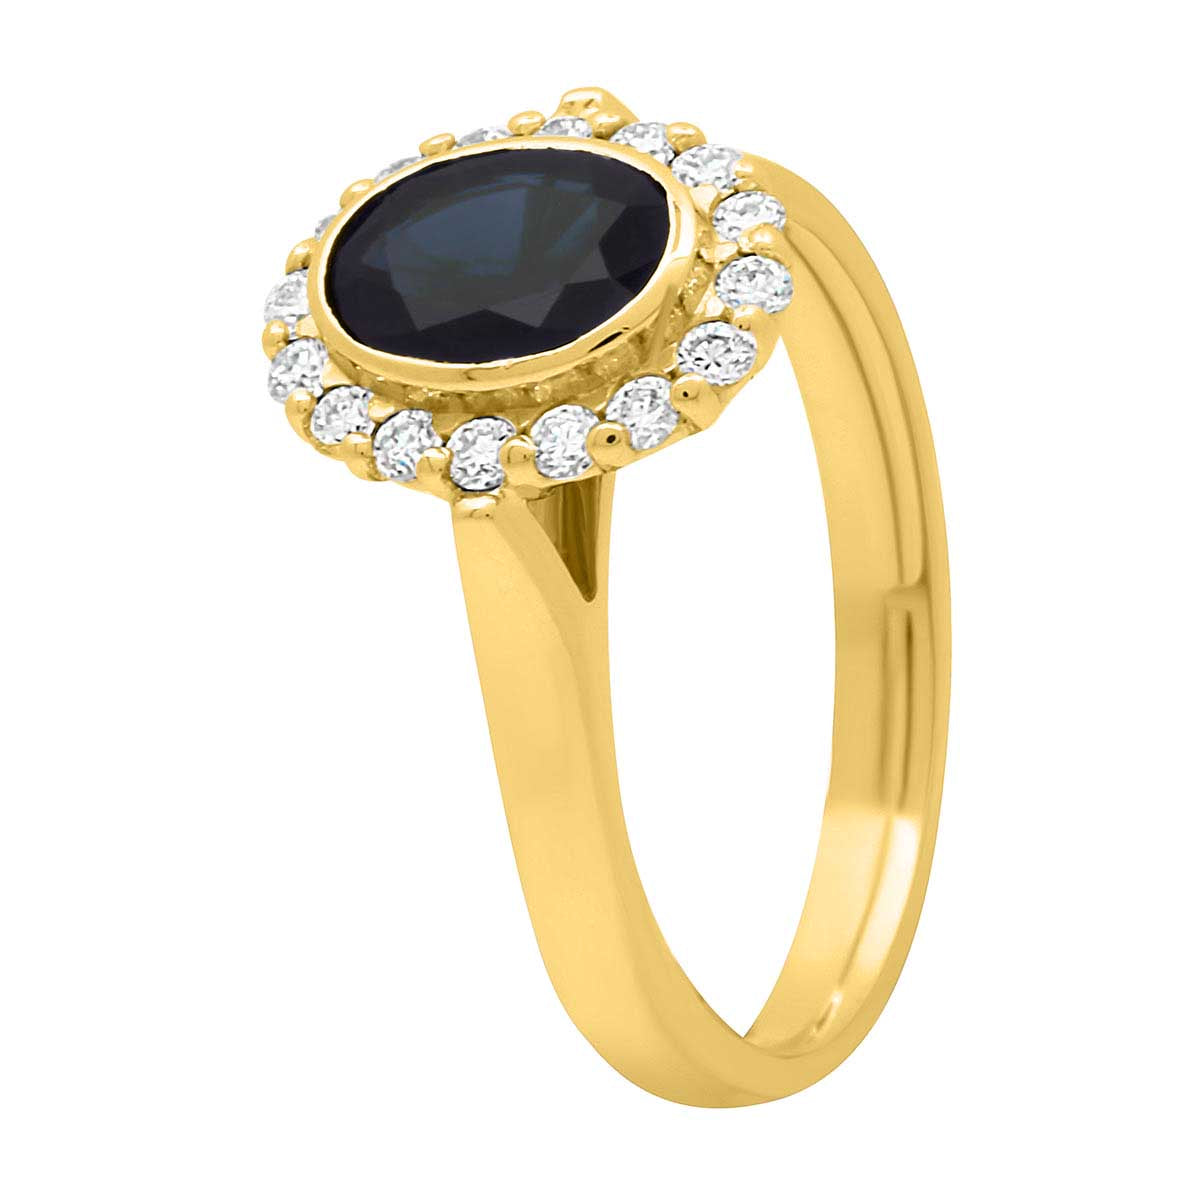 Sapphire Bezel Engagement Ring in yellow gold standing upright and to an angle